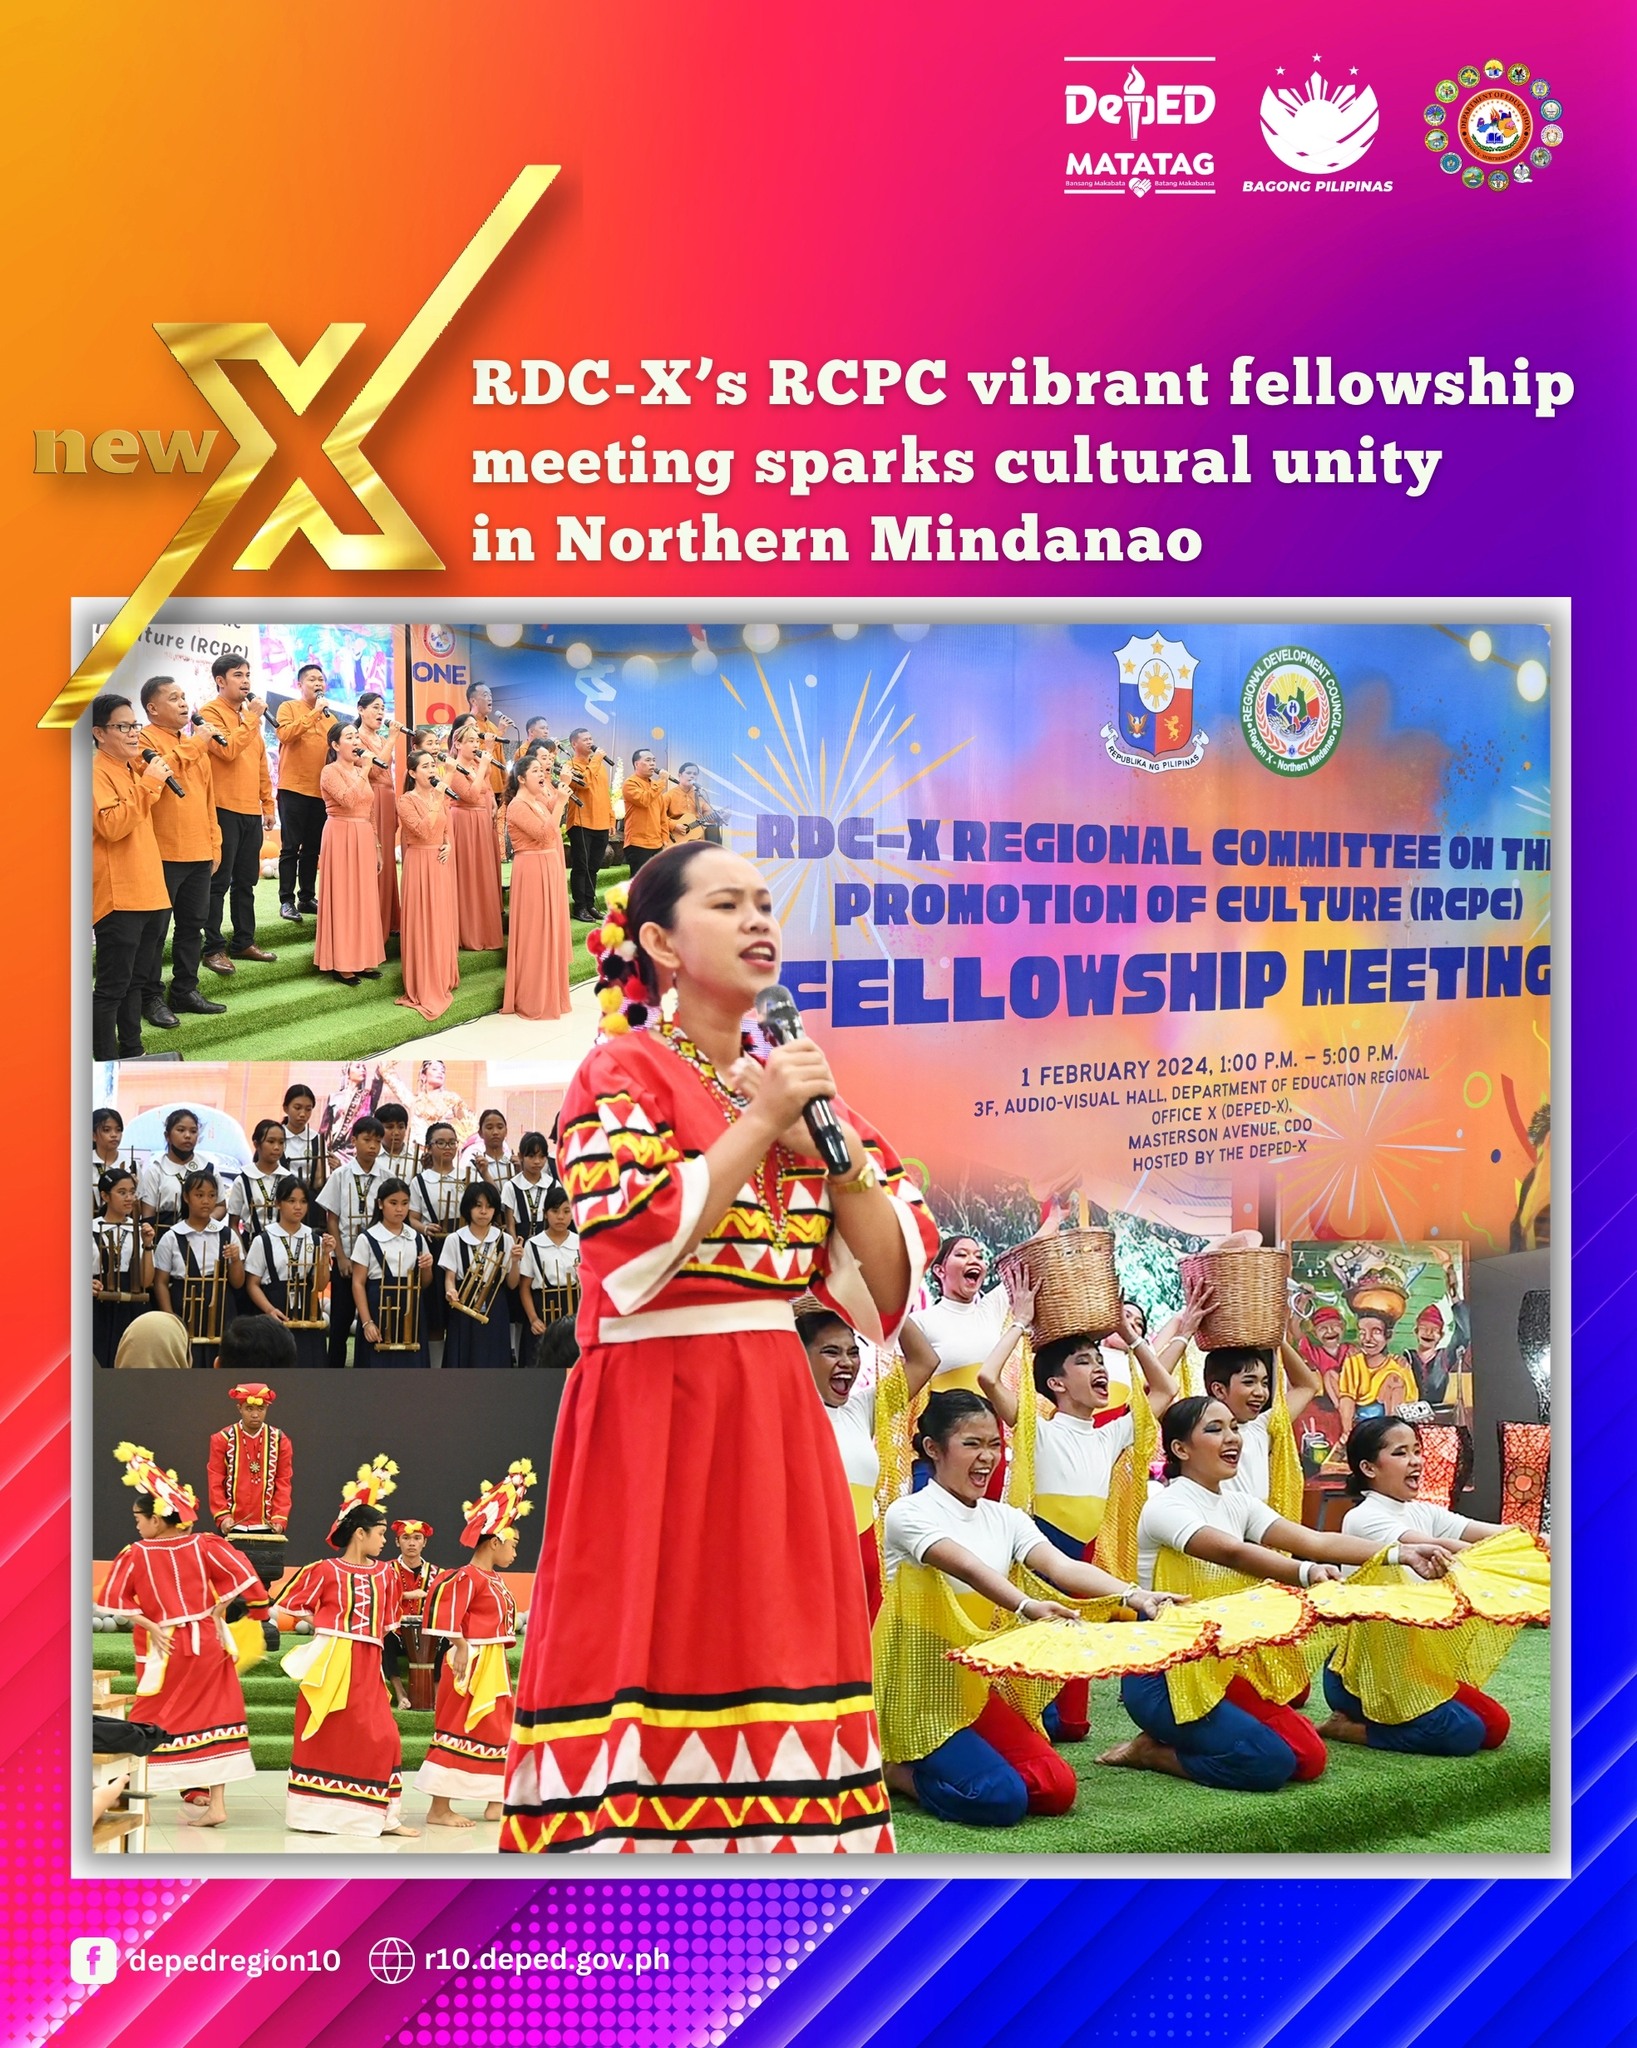 RDC-X’s RCPC vibrant fellowship meeting sparks cultural unity in Northern Mindanao